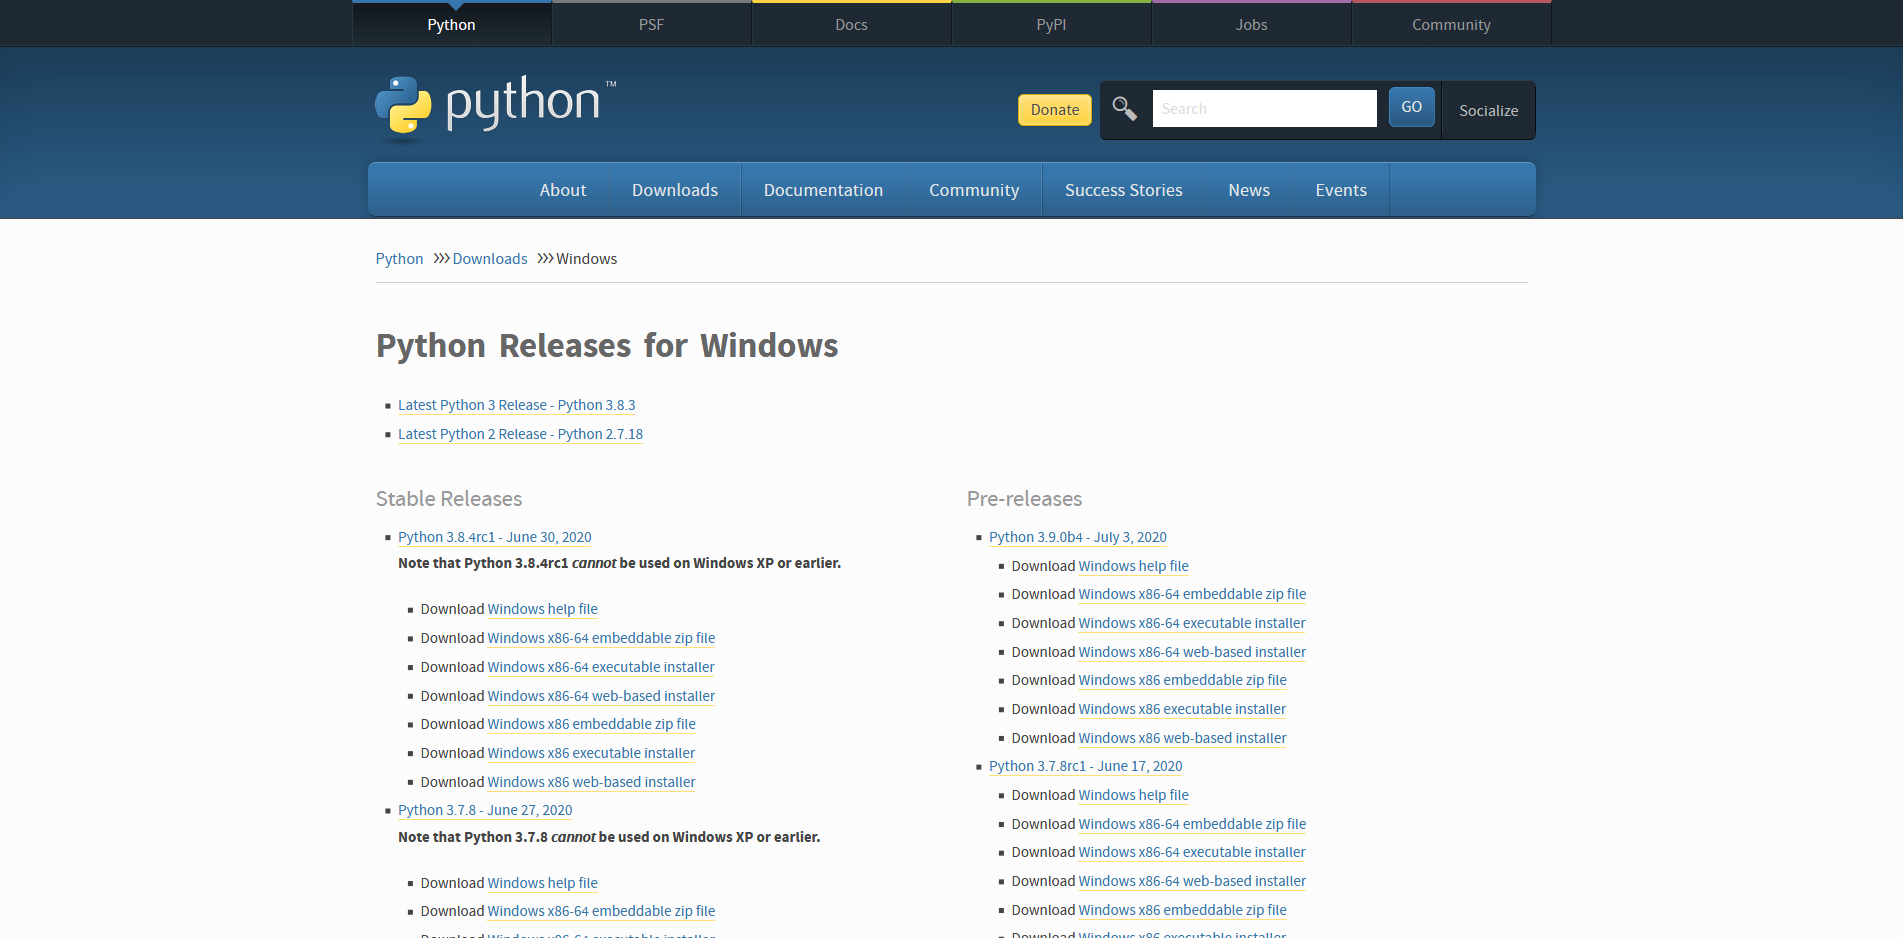 Screenshot_2020-07-08 Python Releases for Windows.png